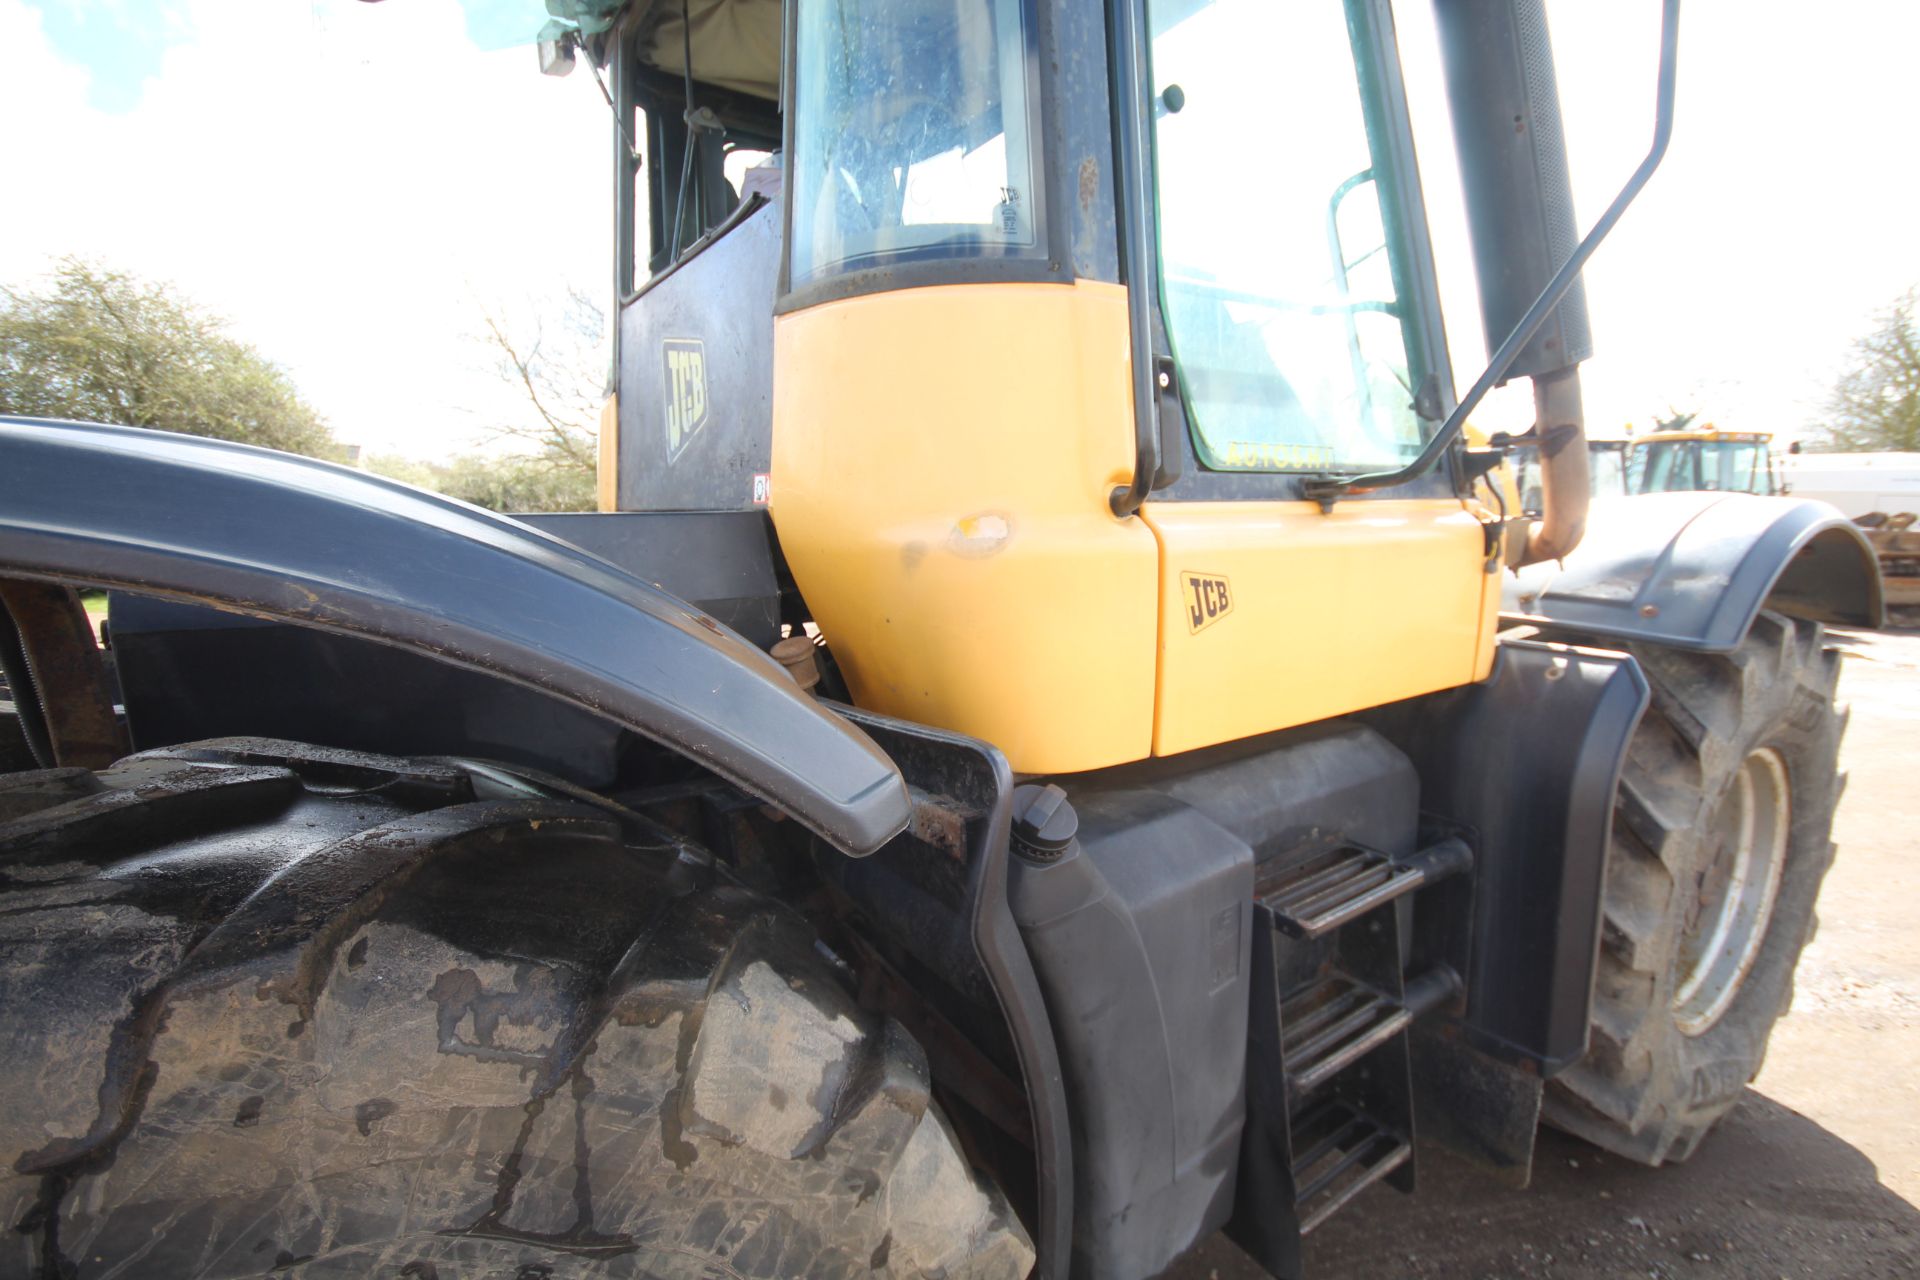 JCB Fastrac 3185 Autoshift 4WD tractor. Registration X642 AHT. Date of first registration 04/09/ - Image 43 of 71